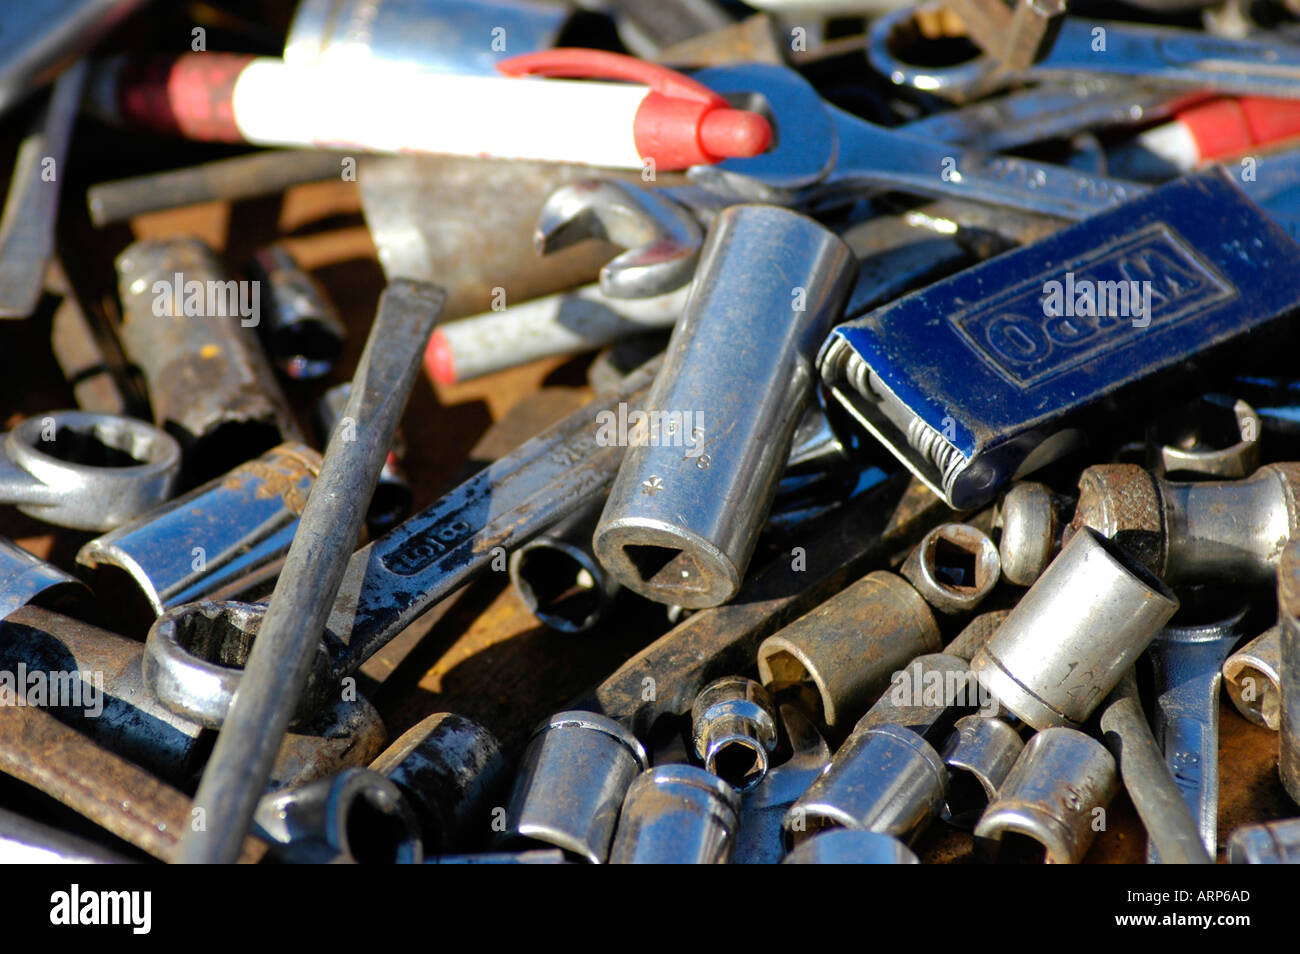 Hand tools for sale at flea tag market some new and some used old and cheap for machinists Stock Photo